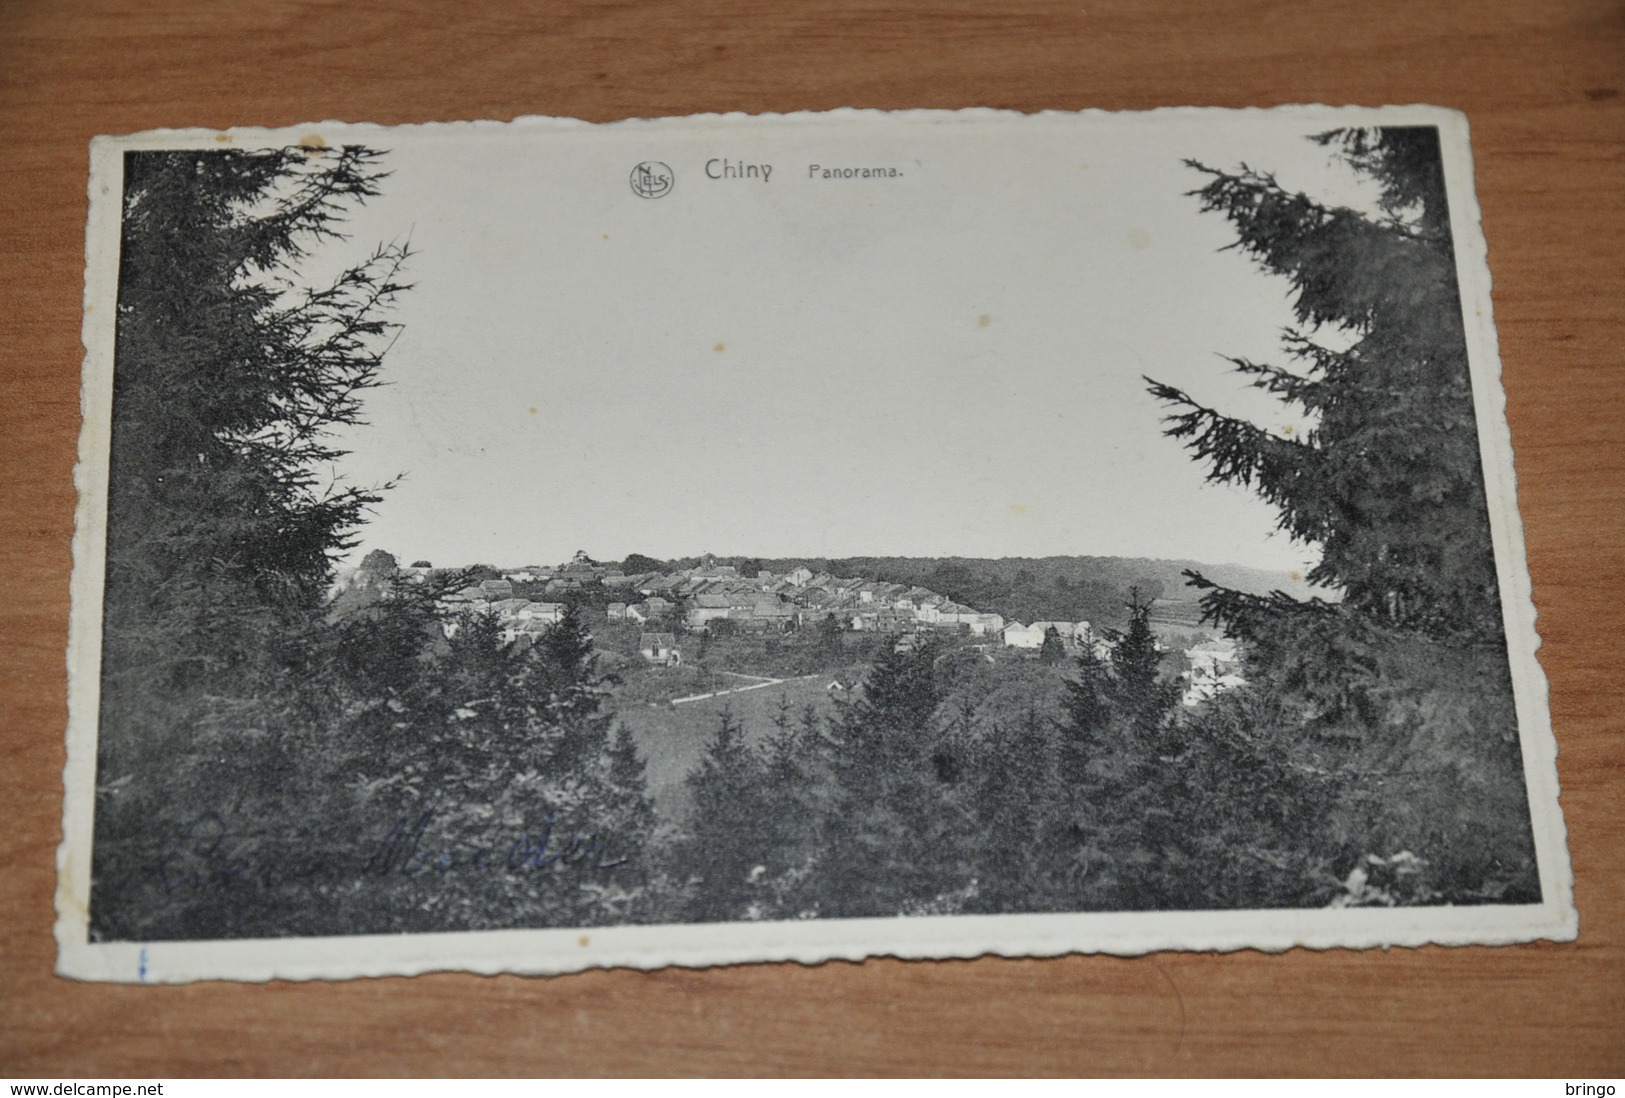 6814-   CHINY, PANORAMA - Florenville